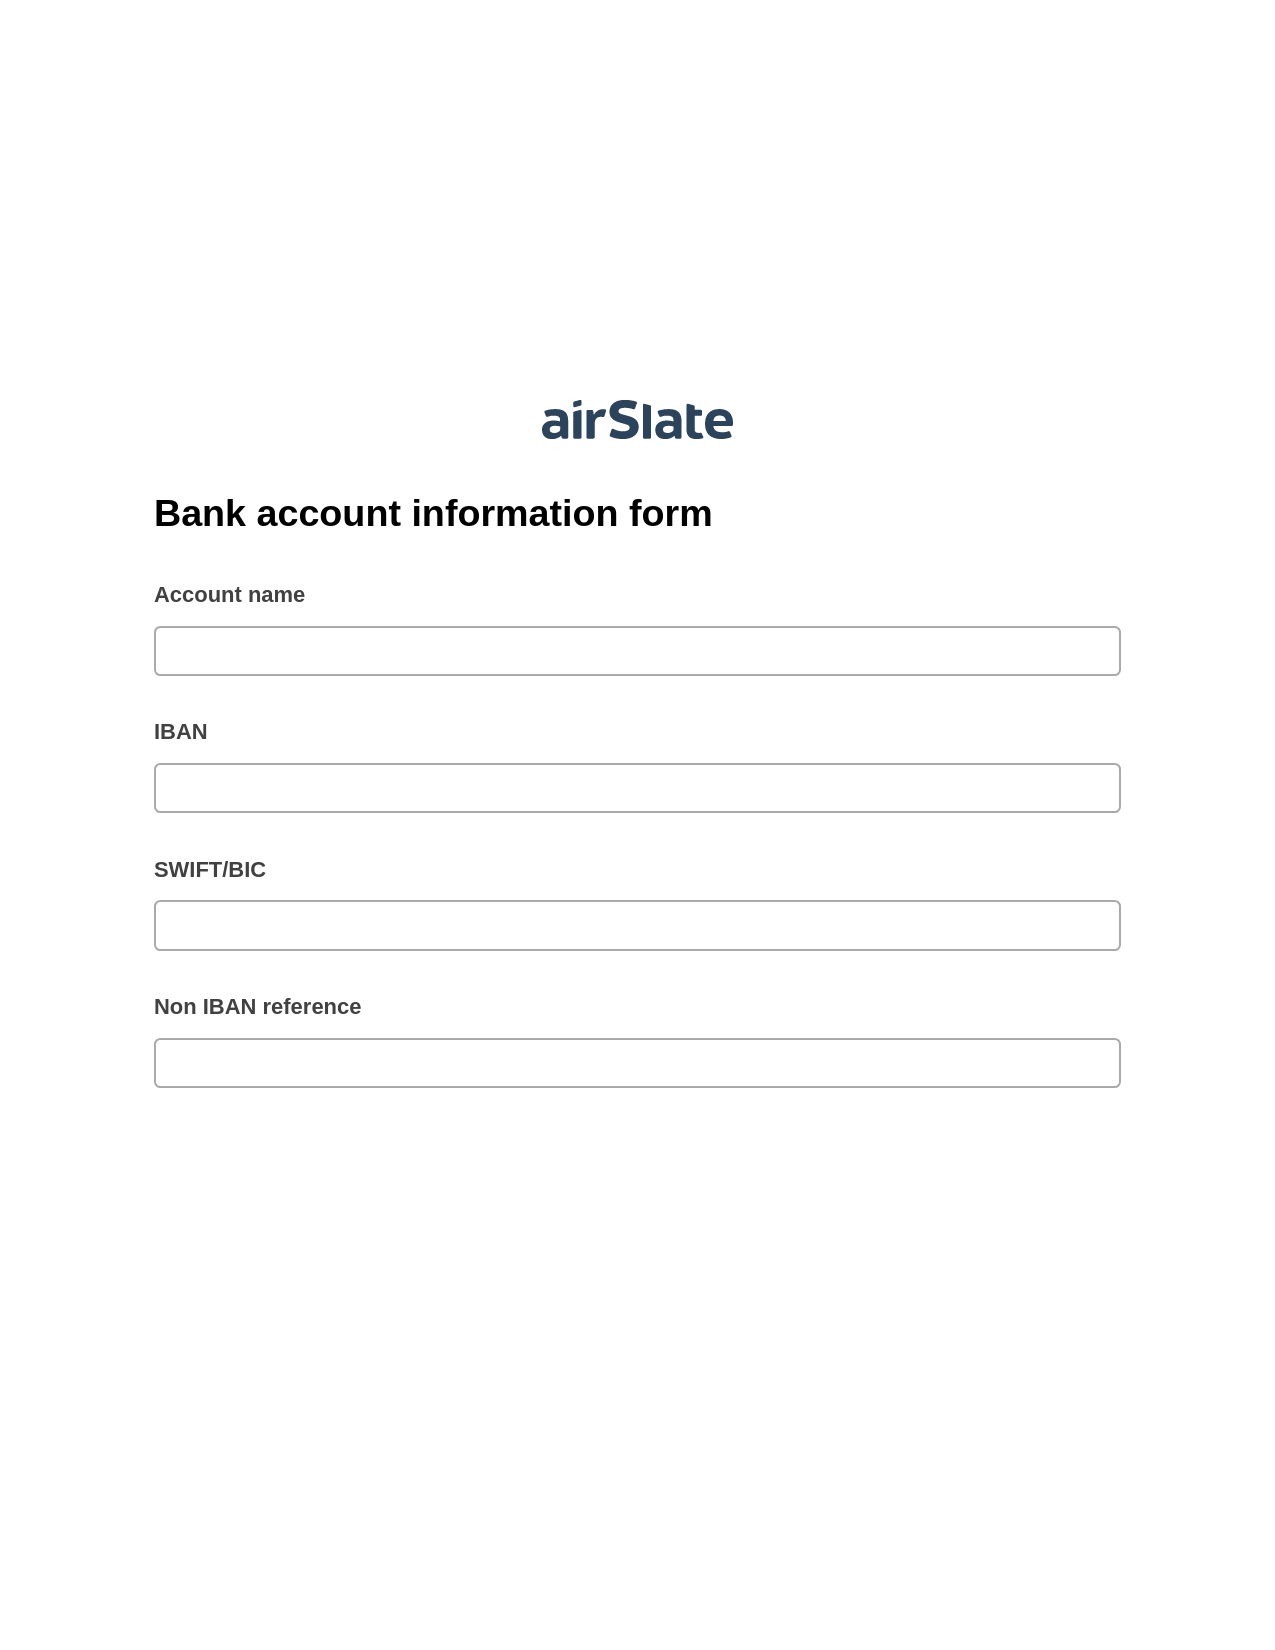 Multirole Bank account information form Pre-fill from Salesforce Record Bot, Slack Notification Bot, Export to Excel 365 Bot